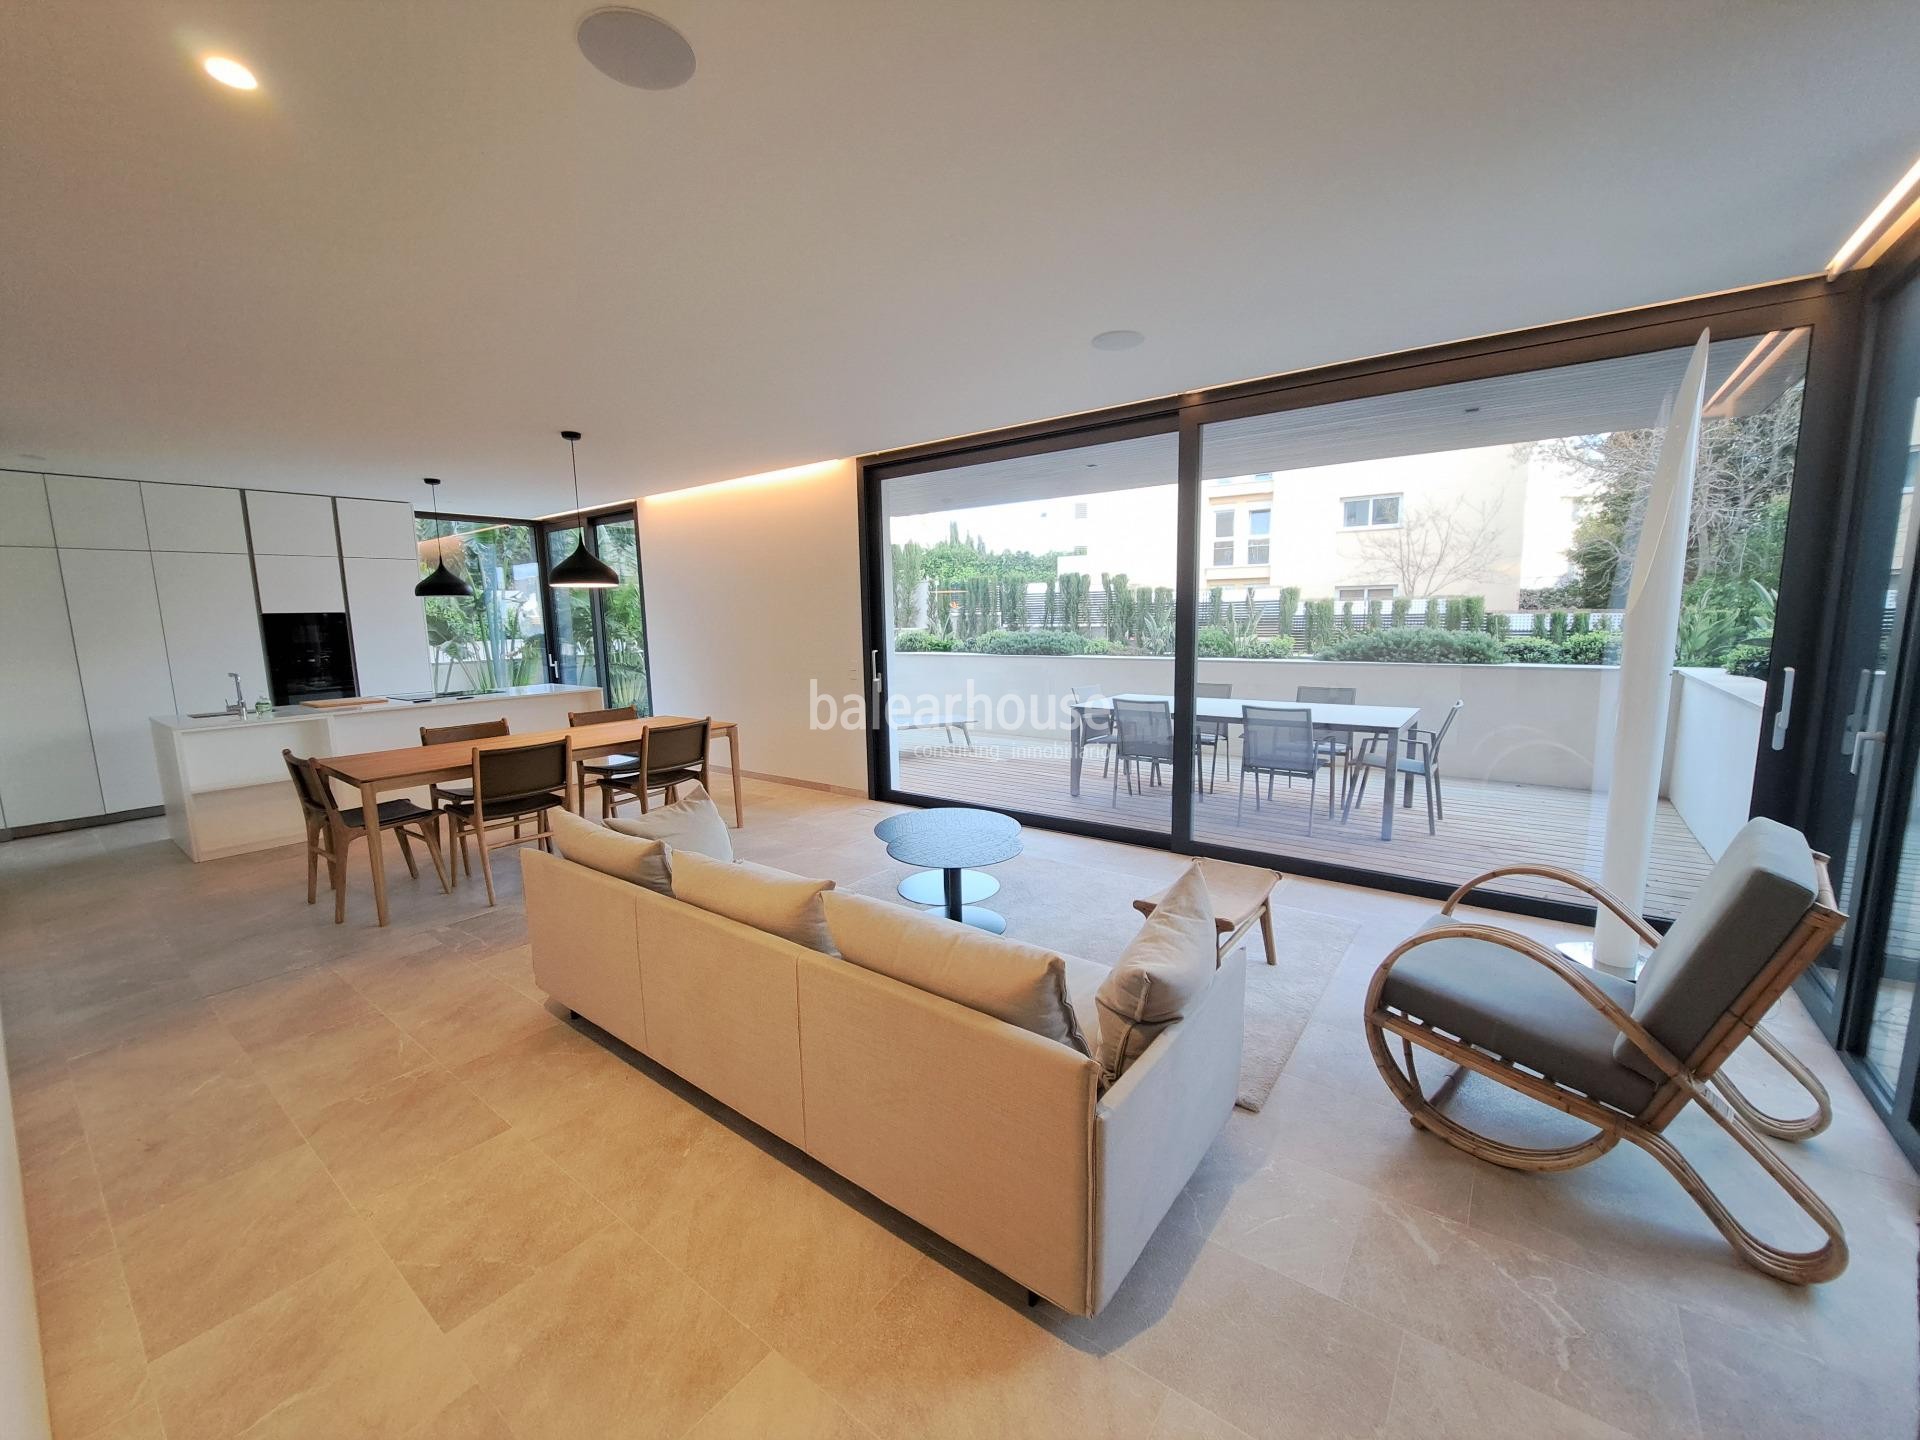 Modern newly built ground floor apartment in Palma with large outdoor garden and terraces